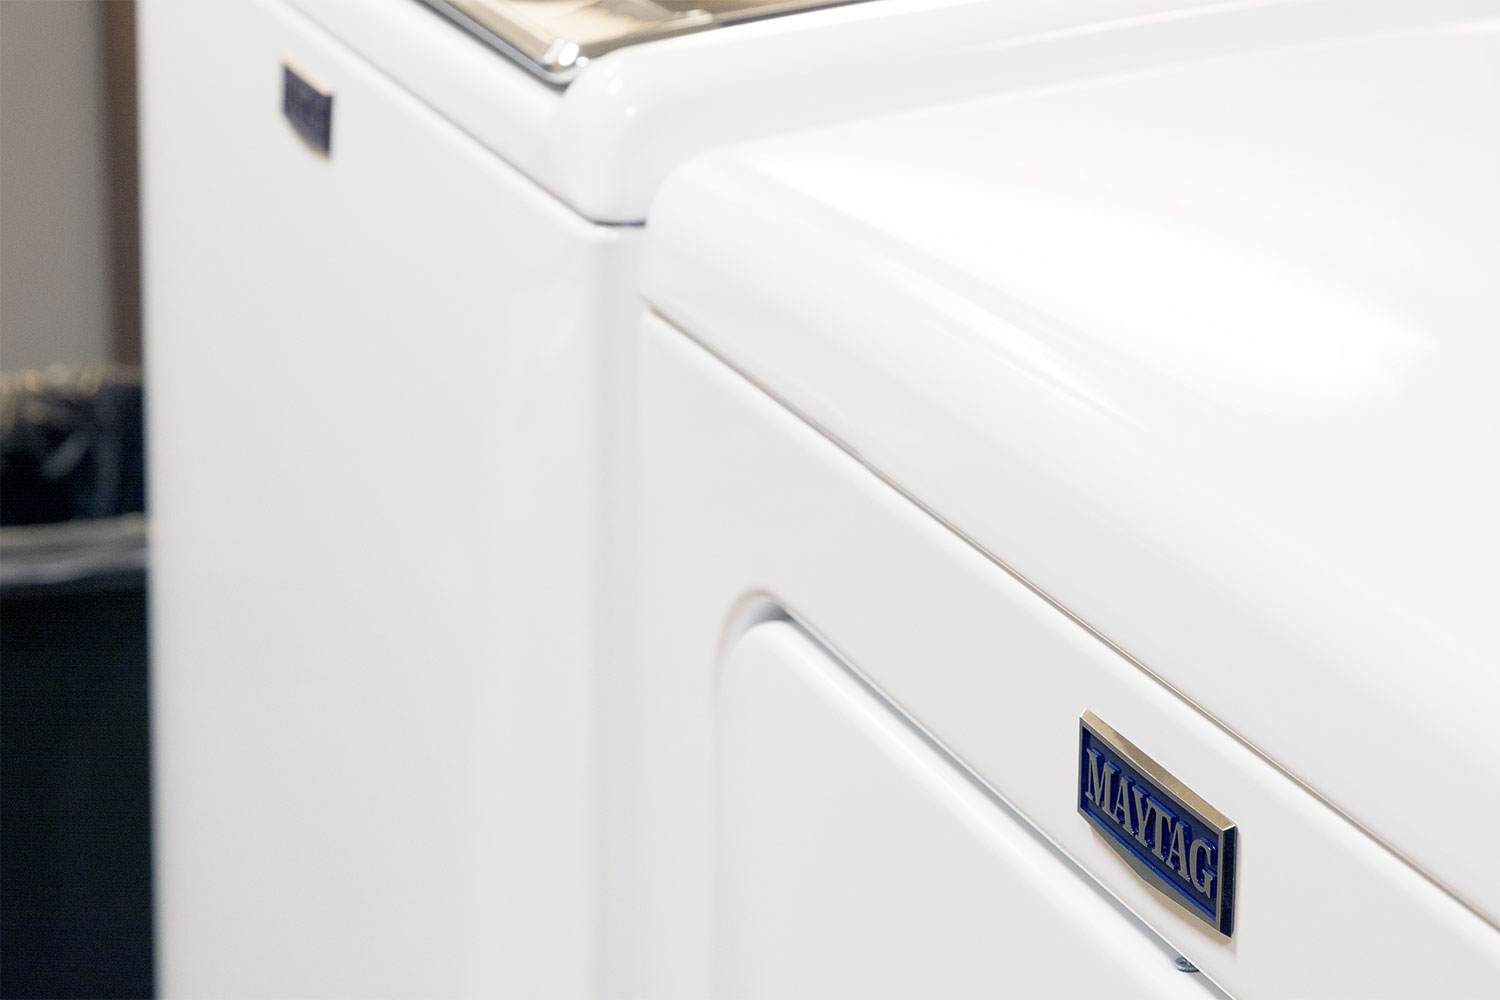 How To Fix The Error Code F03 For Maytag Washing Machine